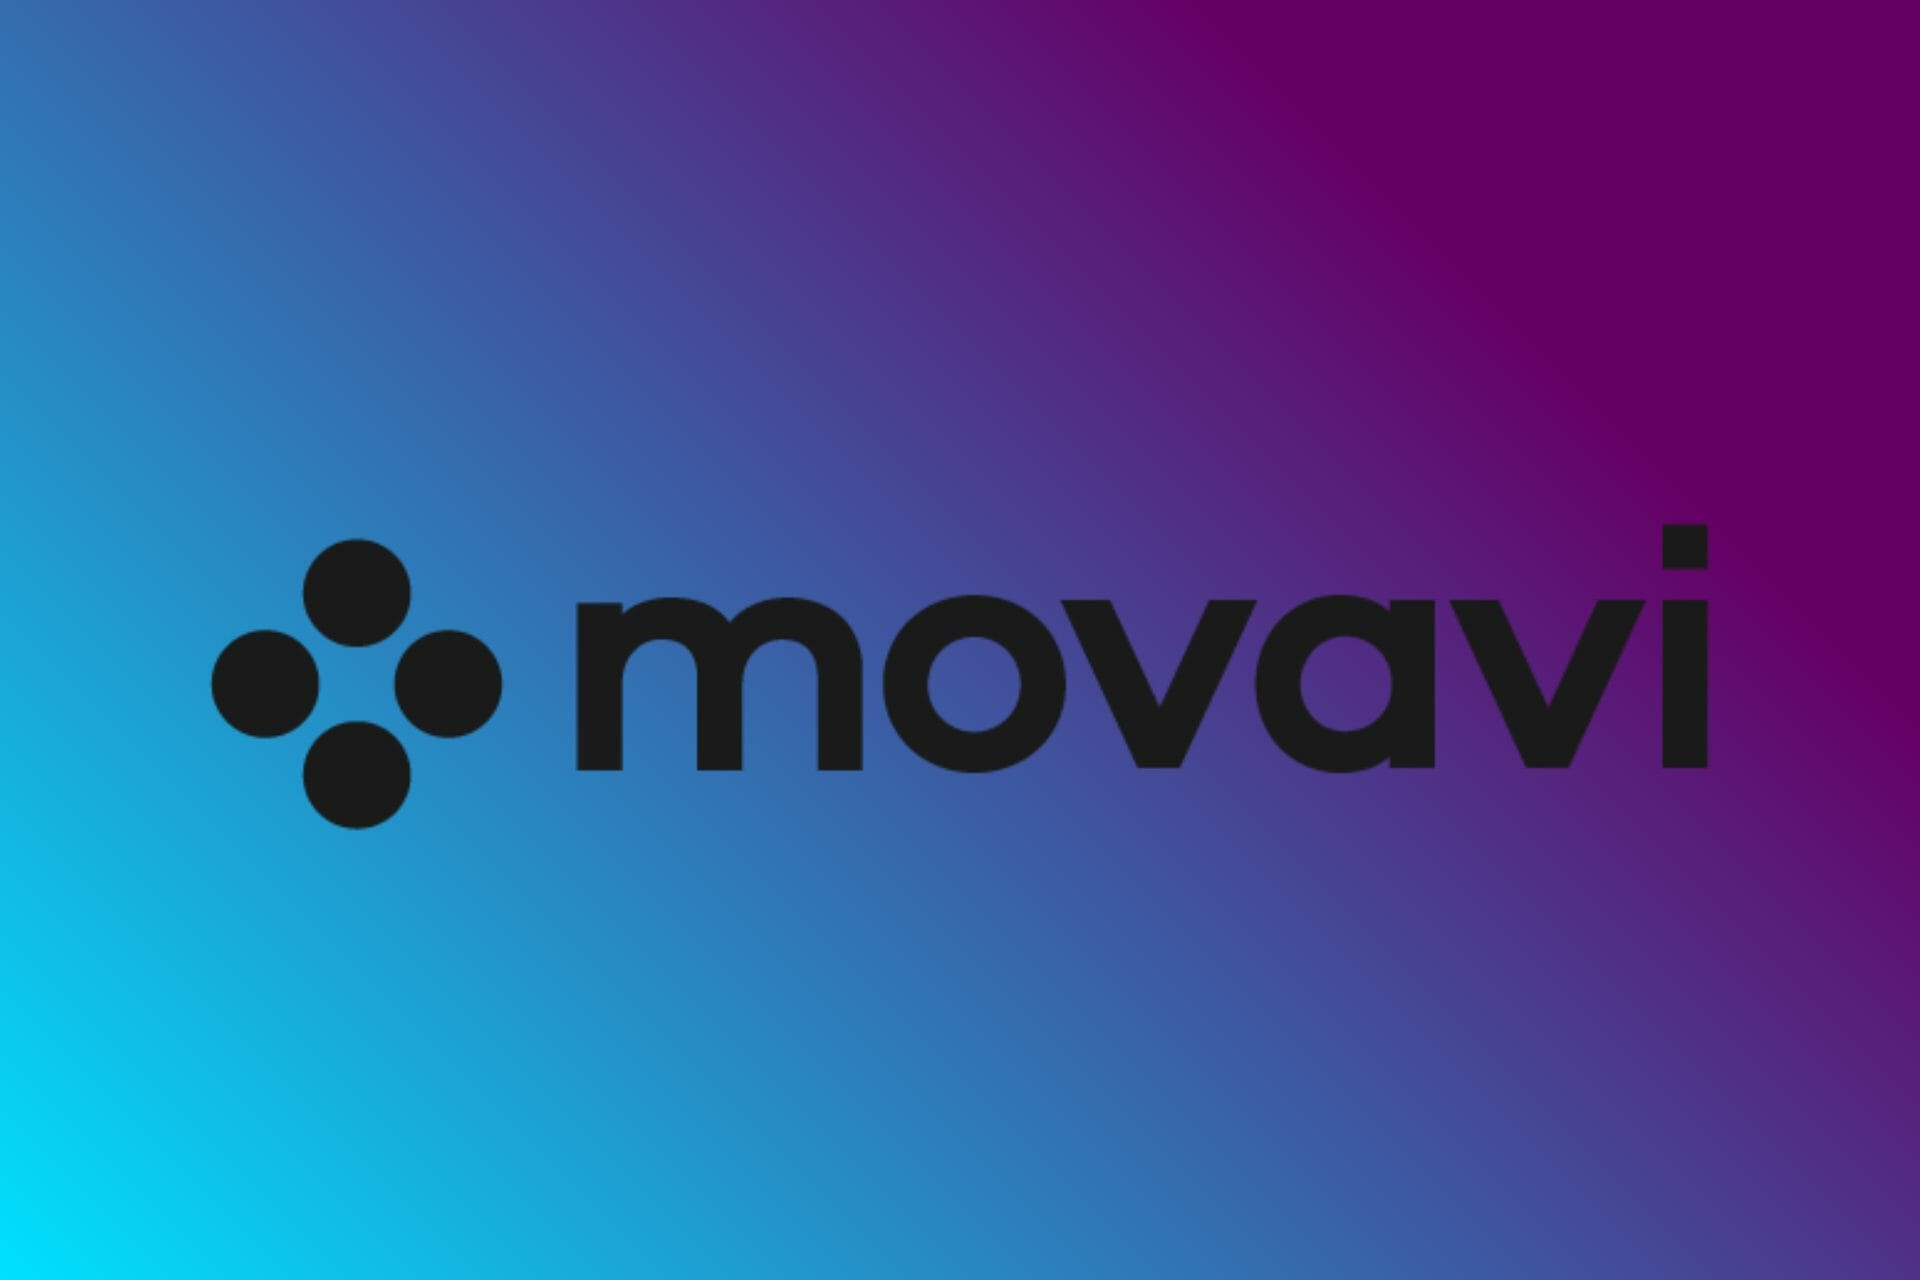 MOVAVI Video editing range of products [Review]